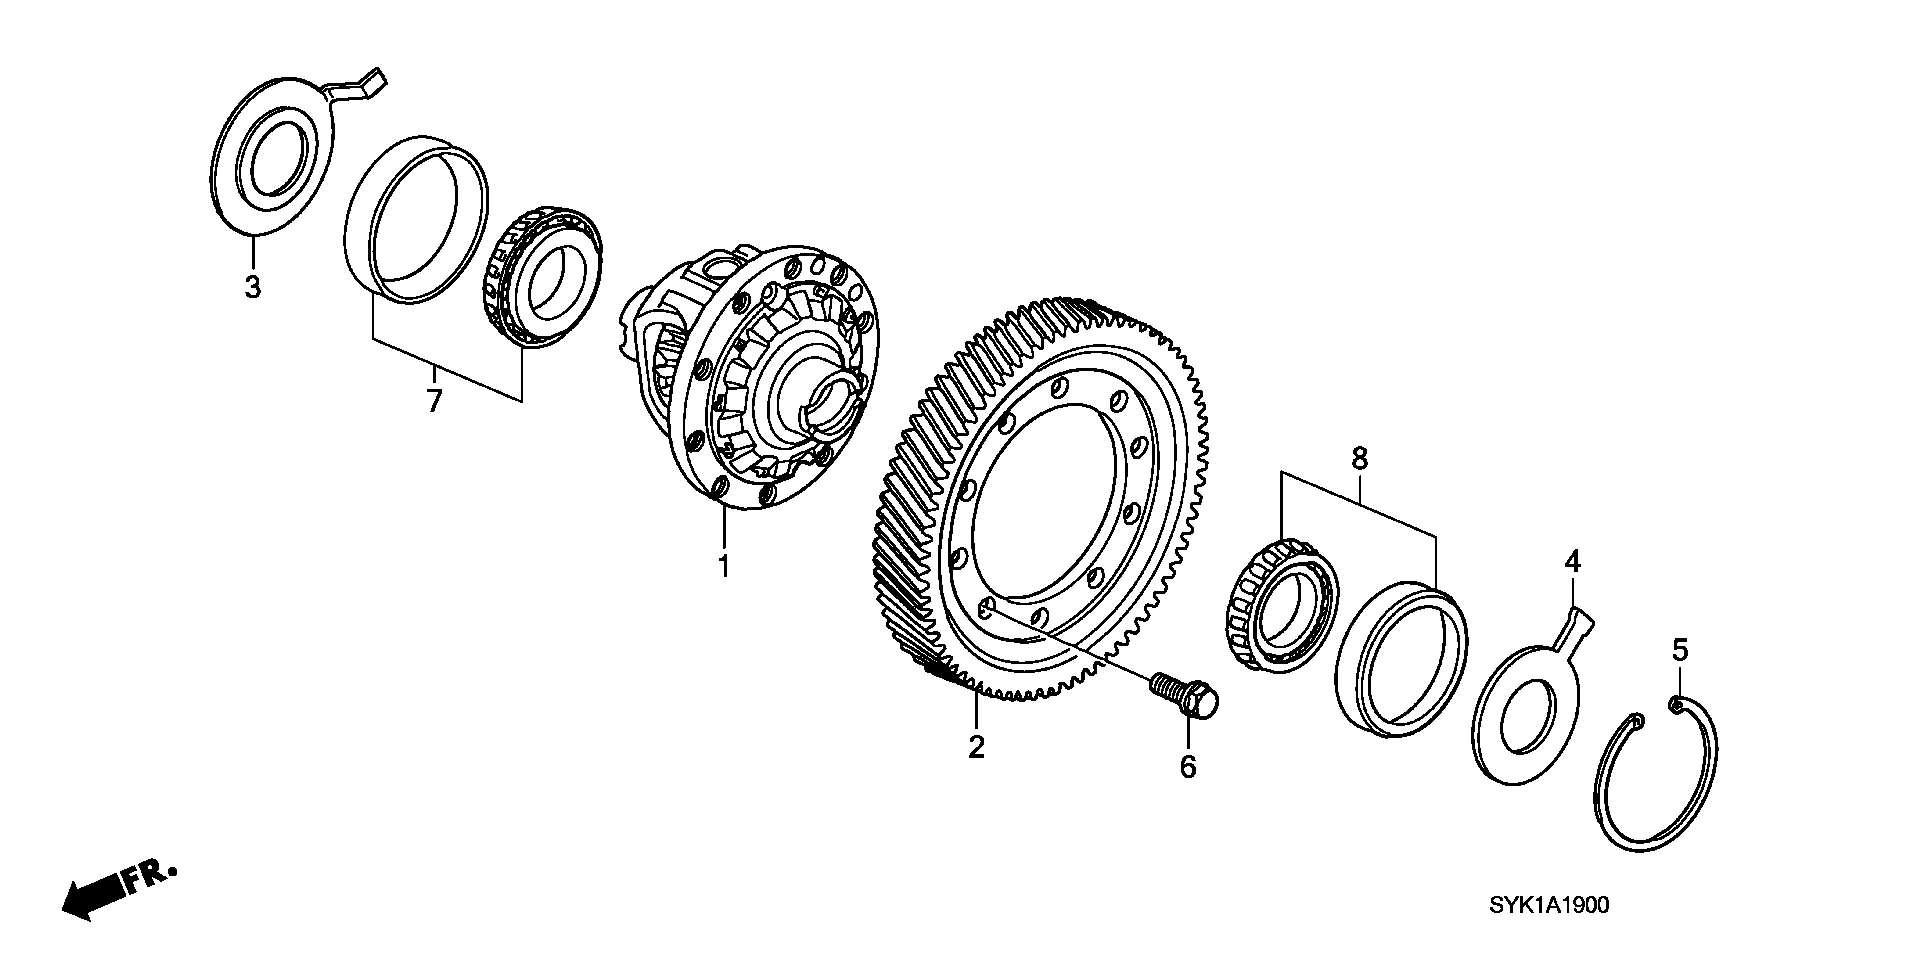 DIFFERENTIAL(2WD)(L4)